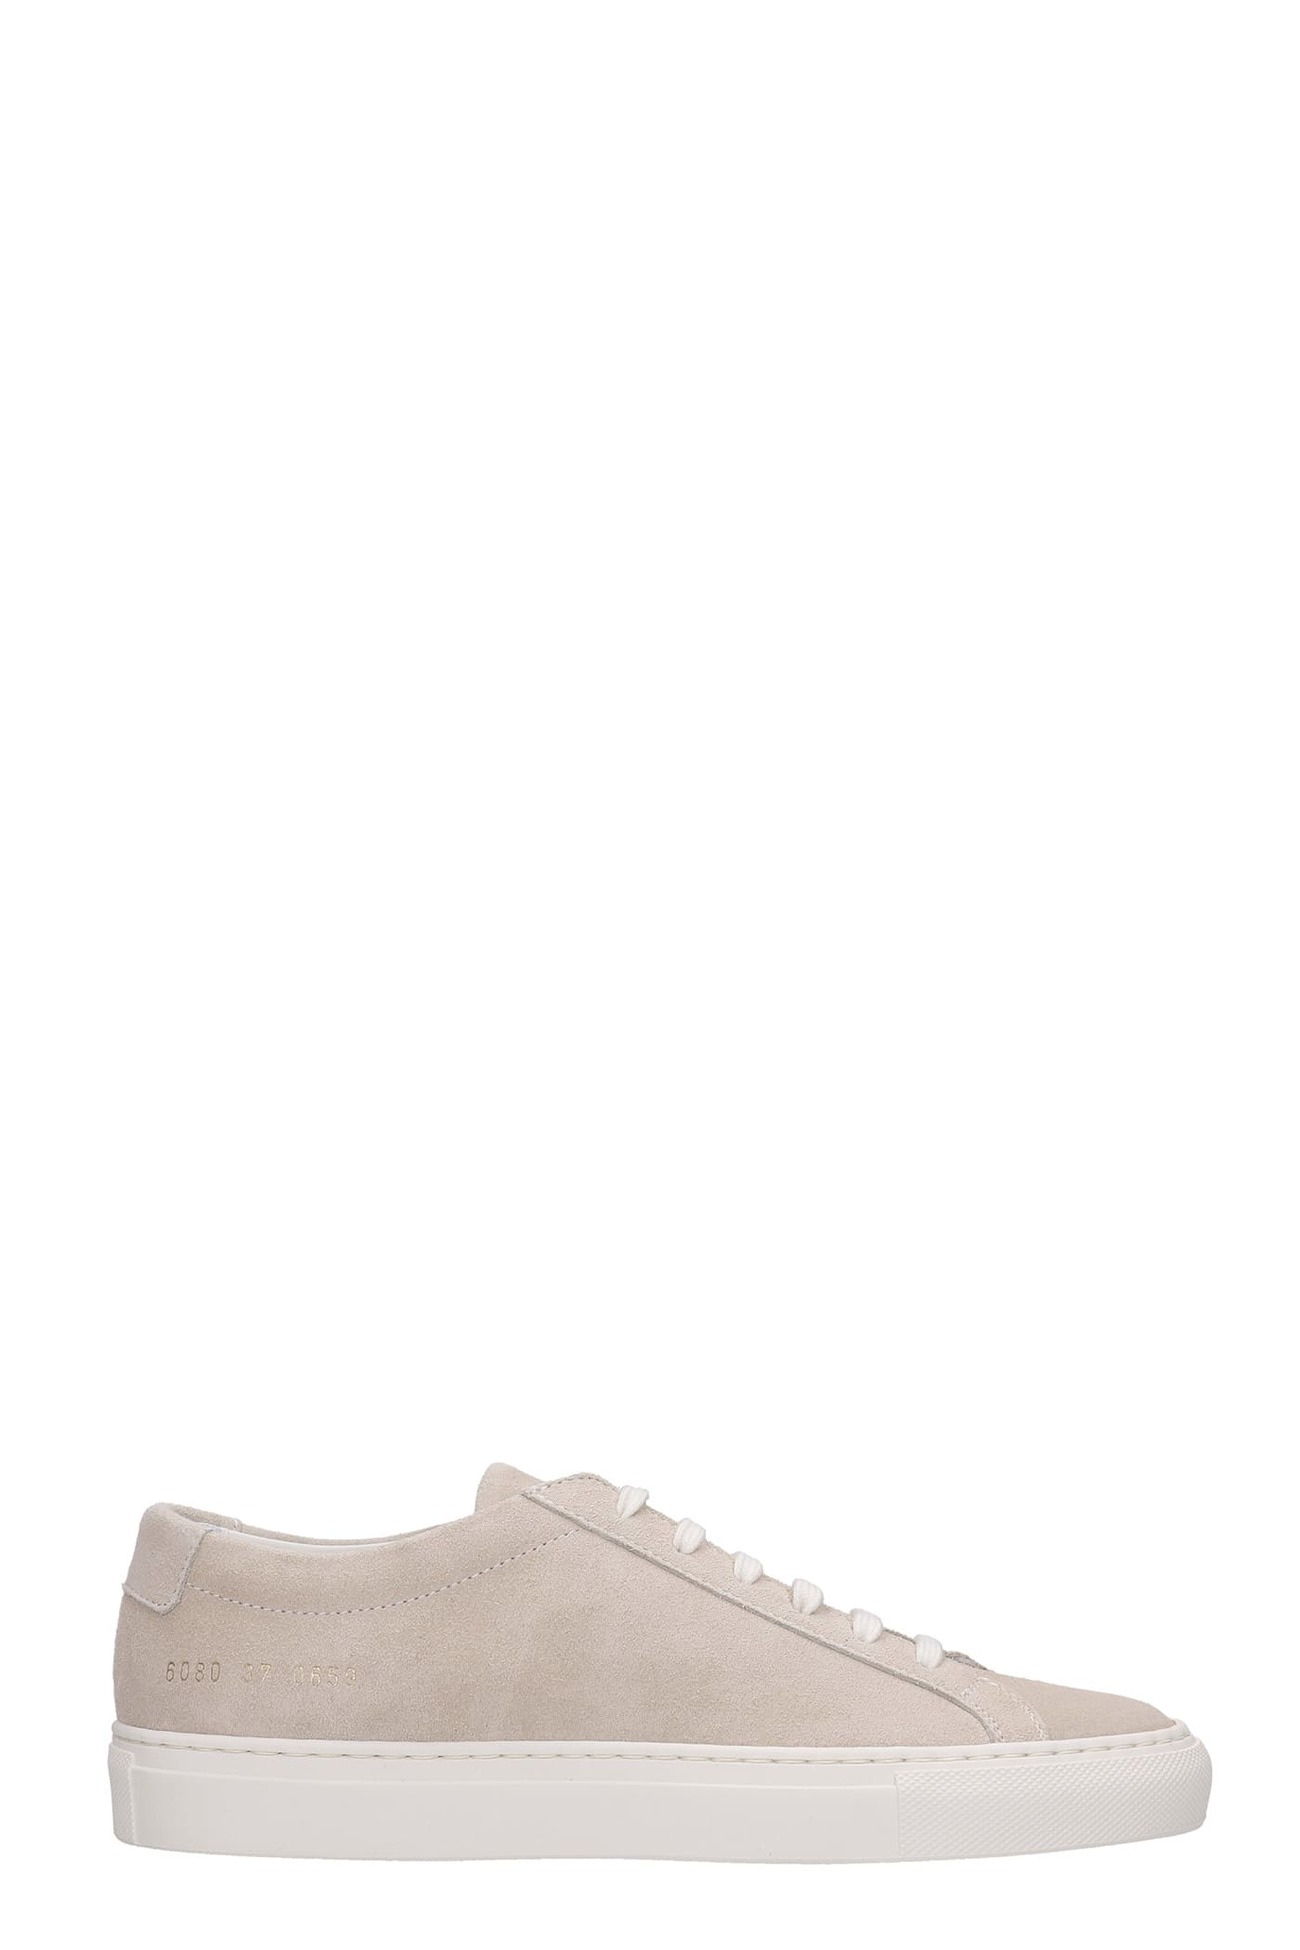 Common Projects Achille Sneakers In Powder Suede in beige